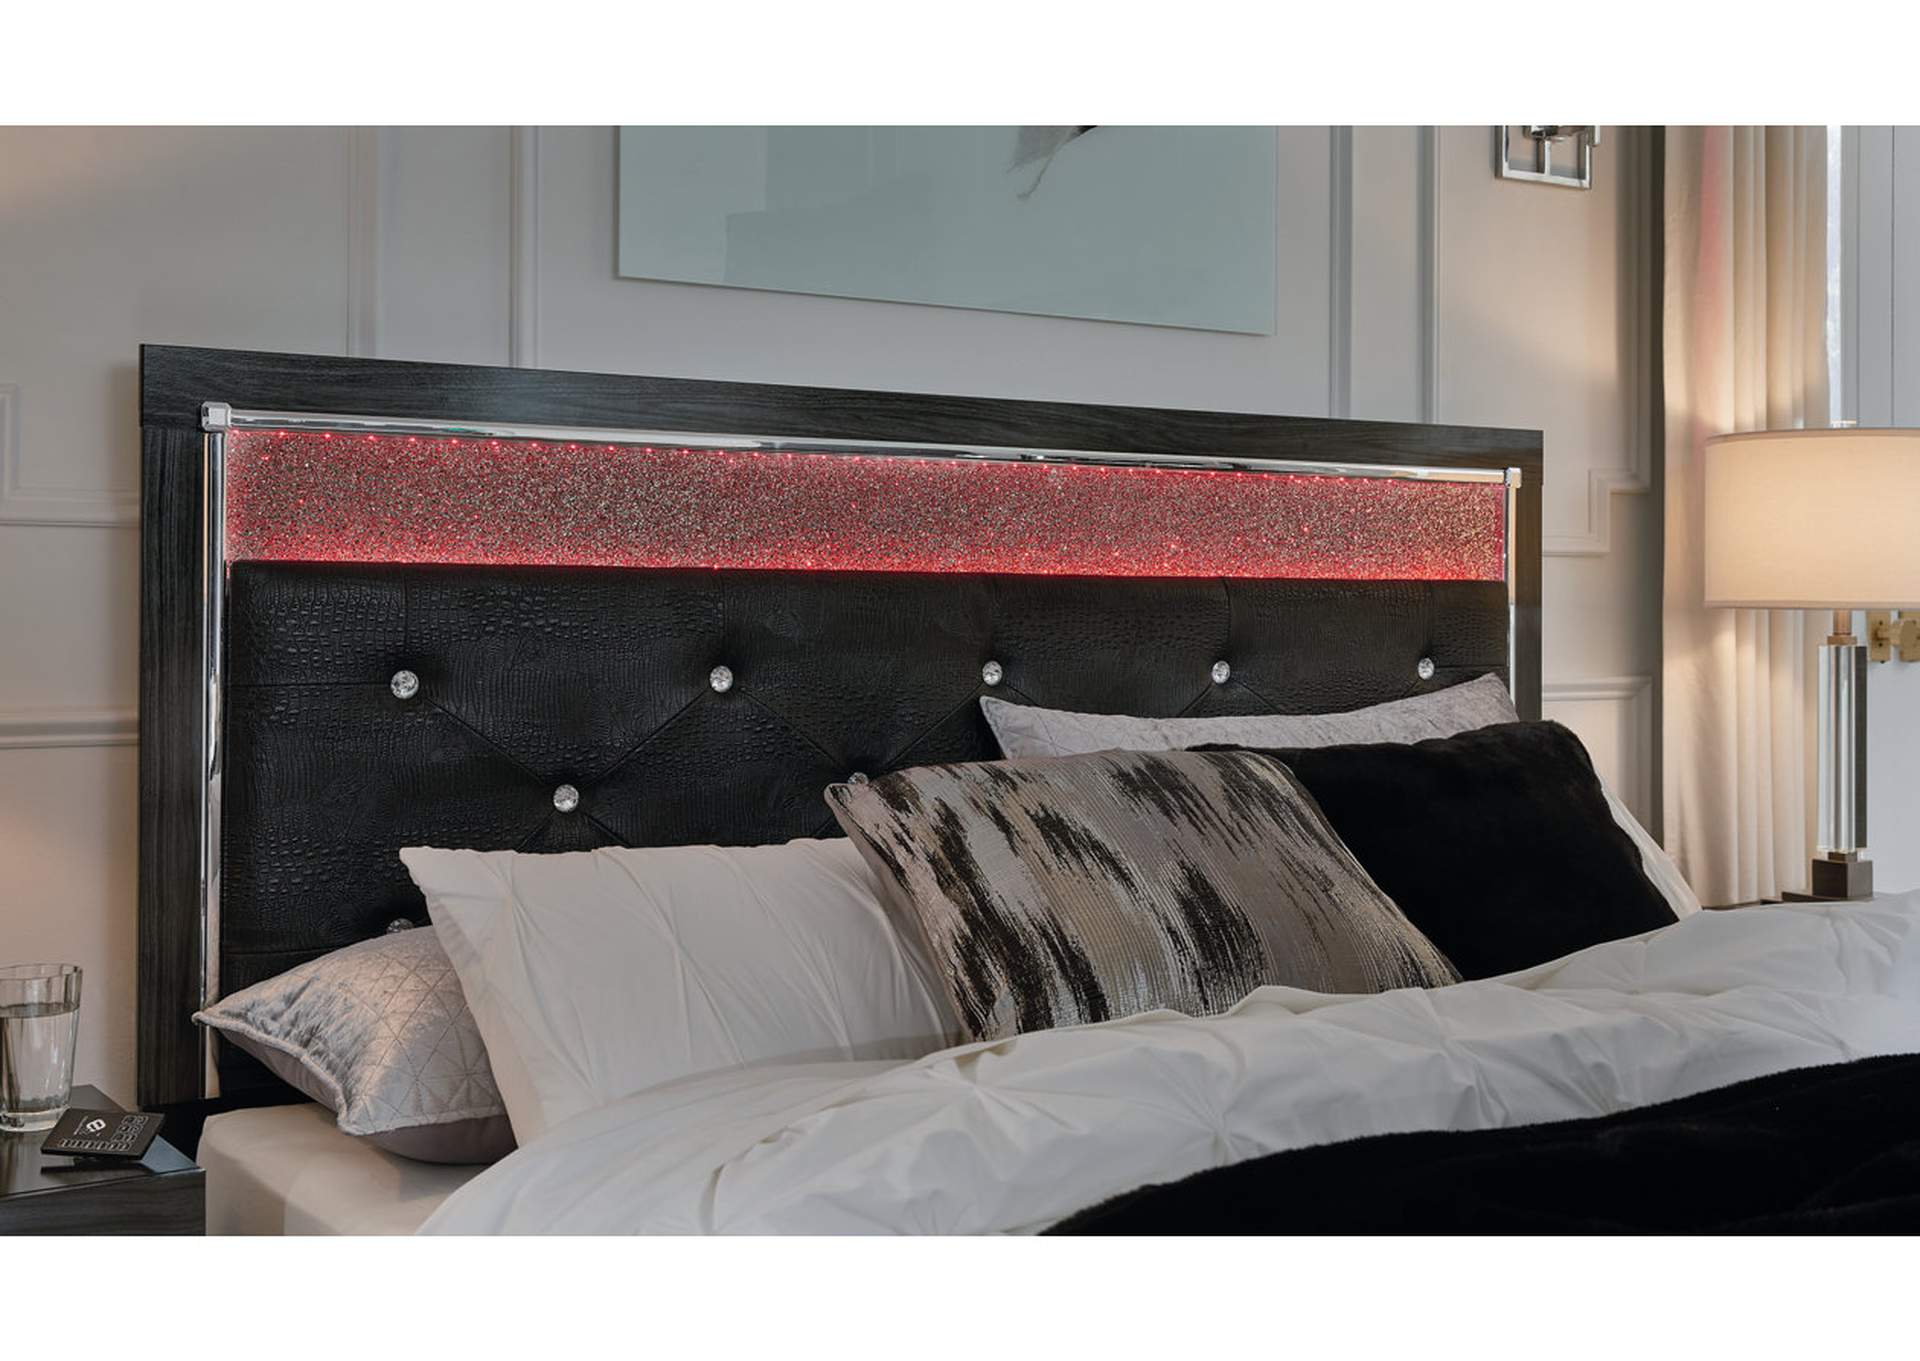 Kaydell King Upholstered Panel Bed,Signature Design By Ashley